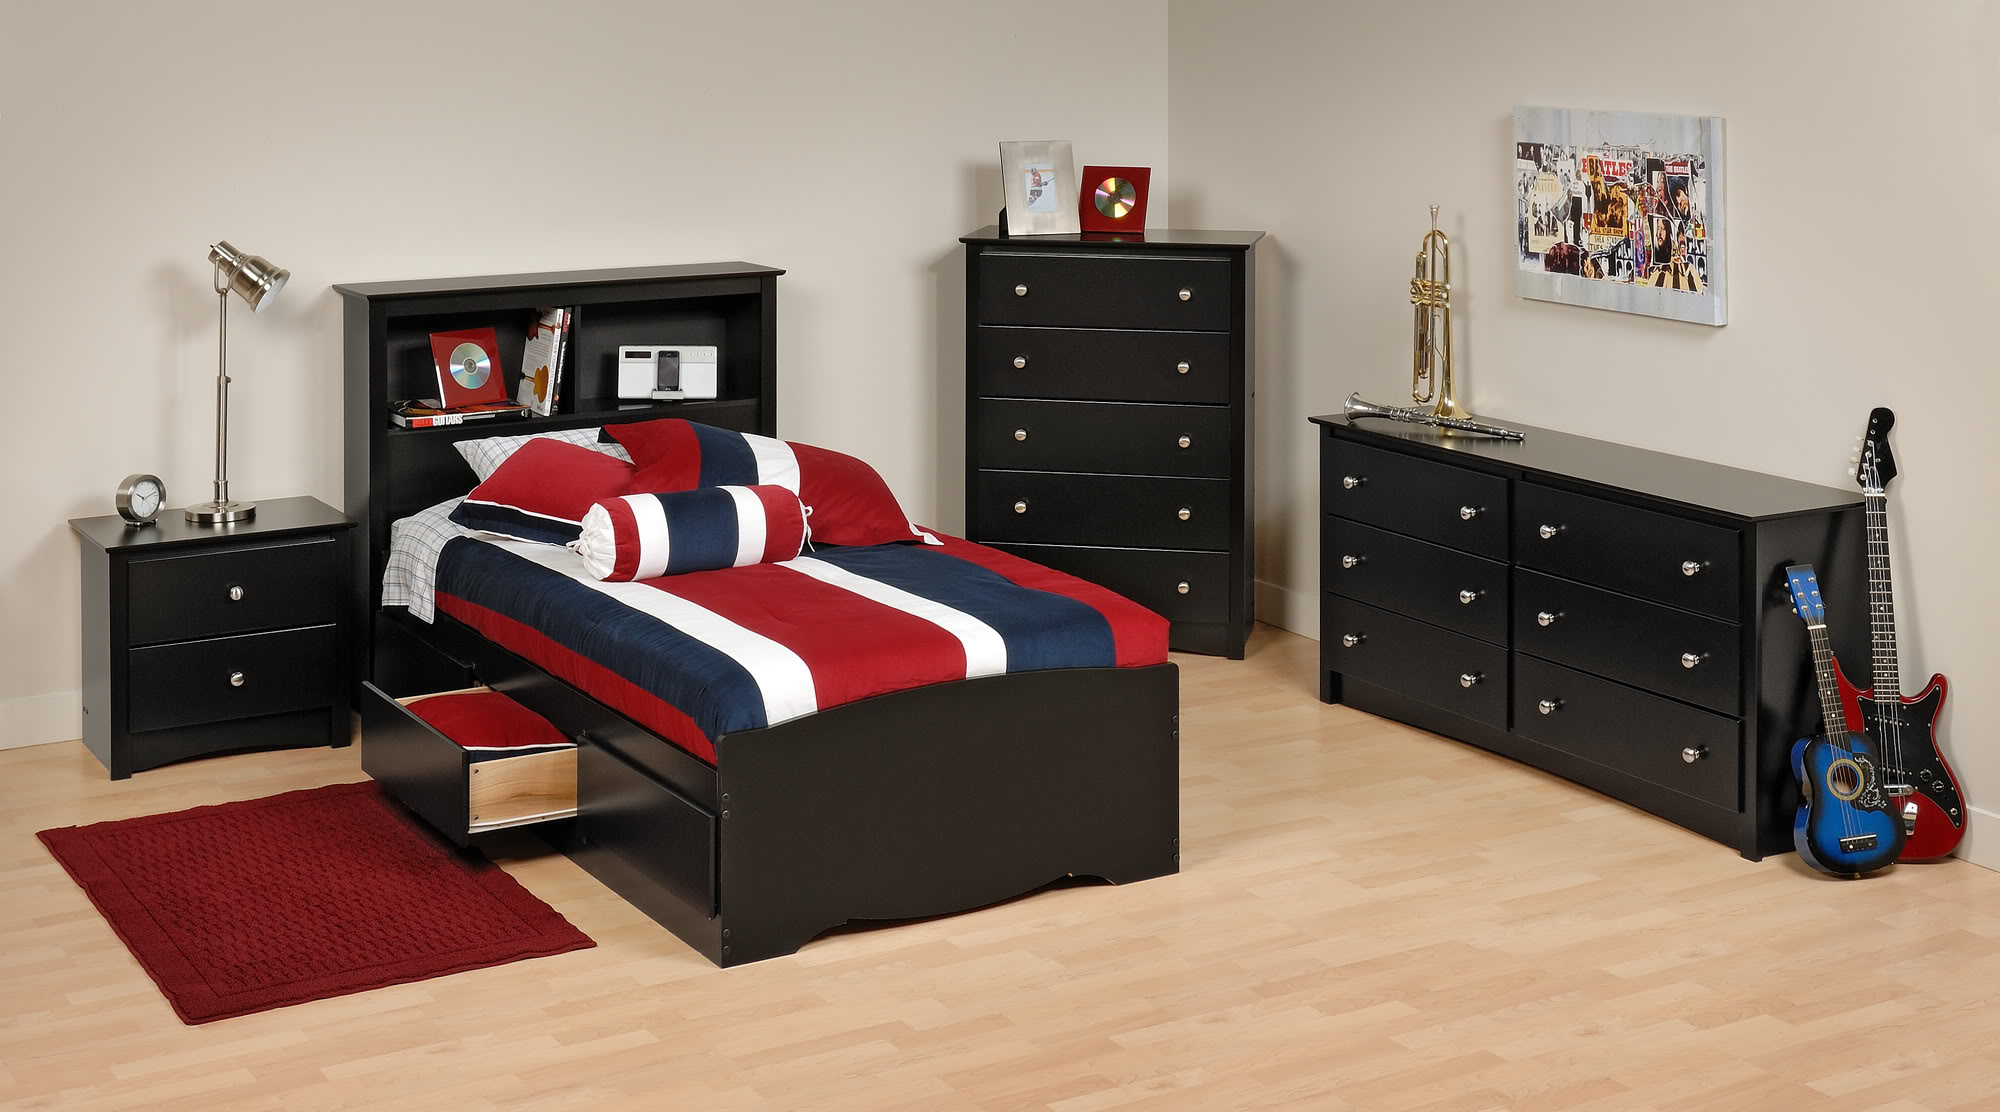 Black Twin Bedroom Furniture Home Decor Photos Gallery in sizing 2000 X 1112